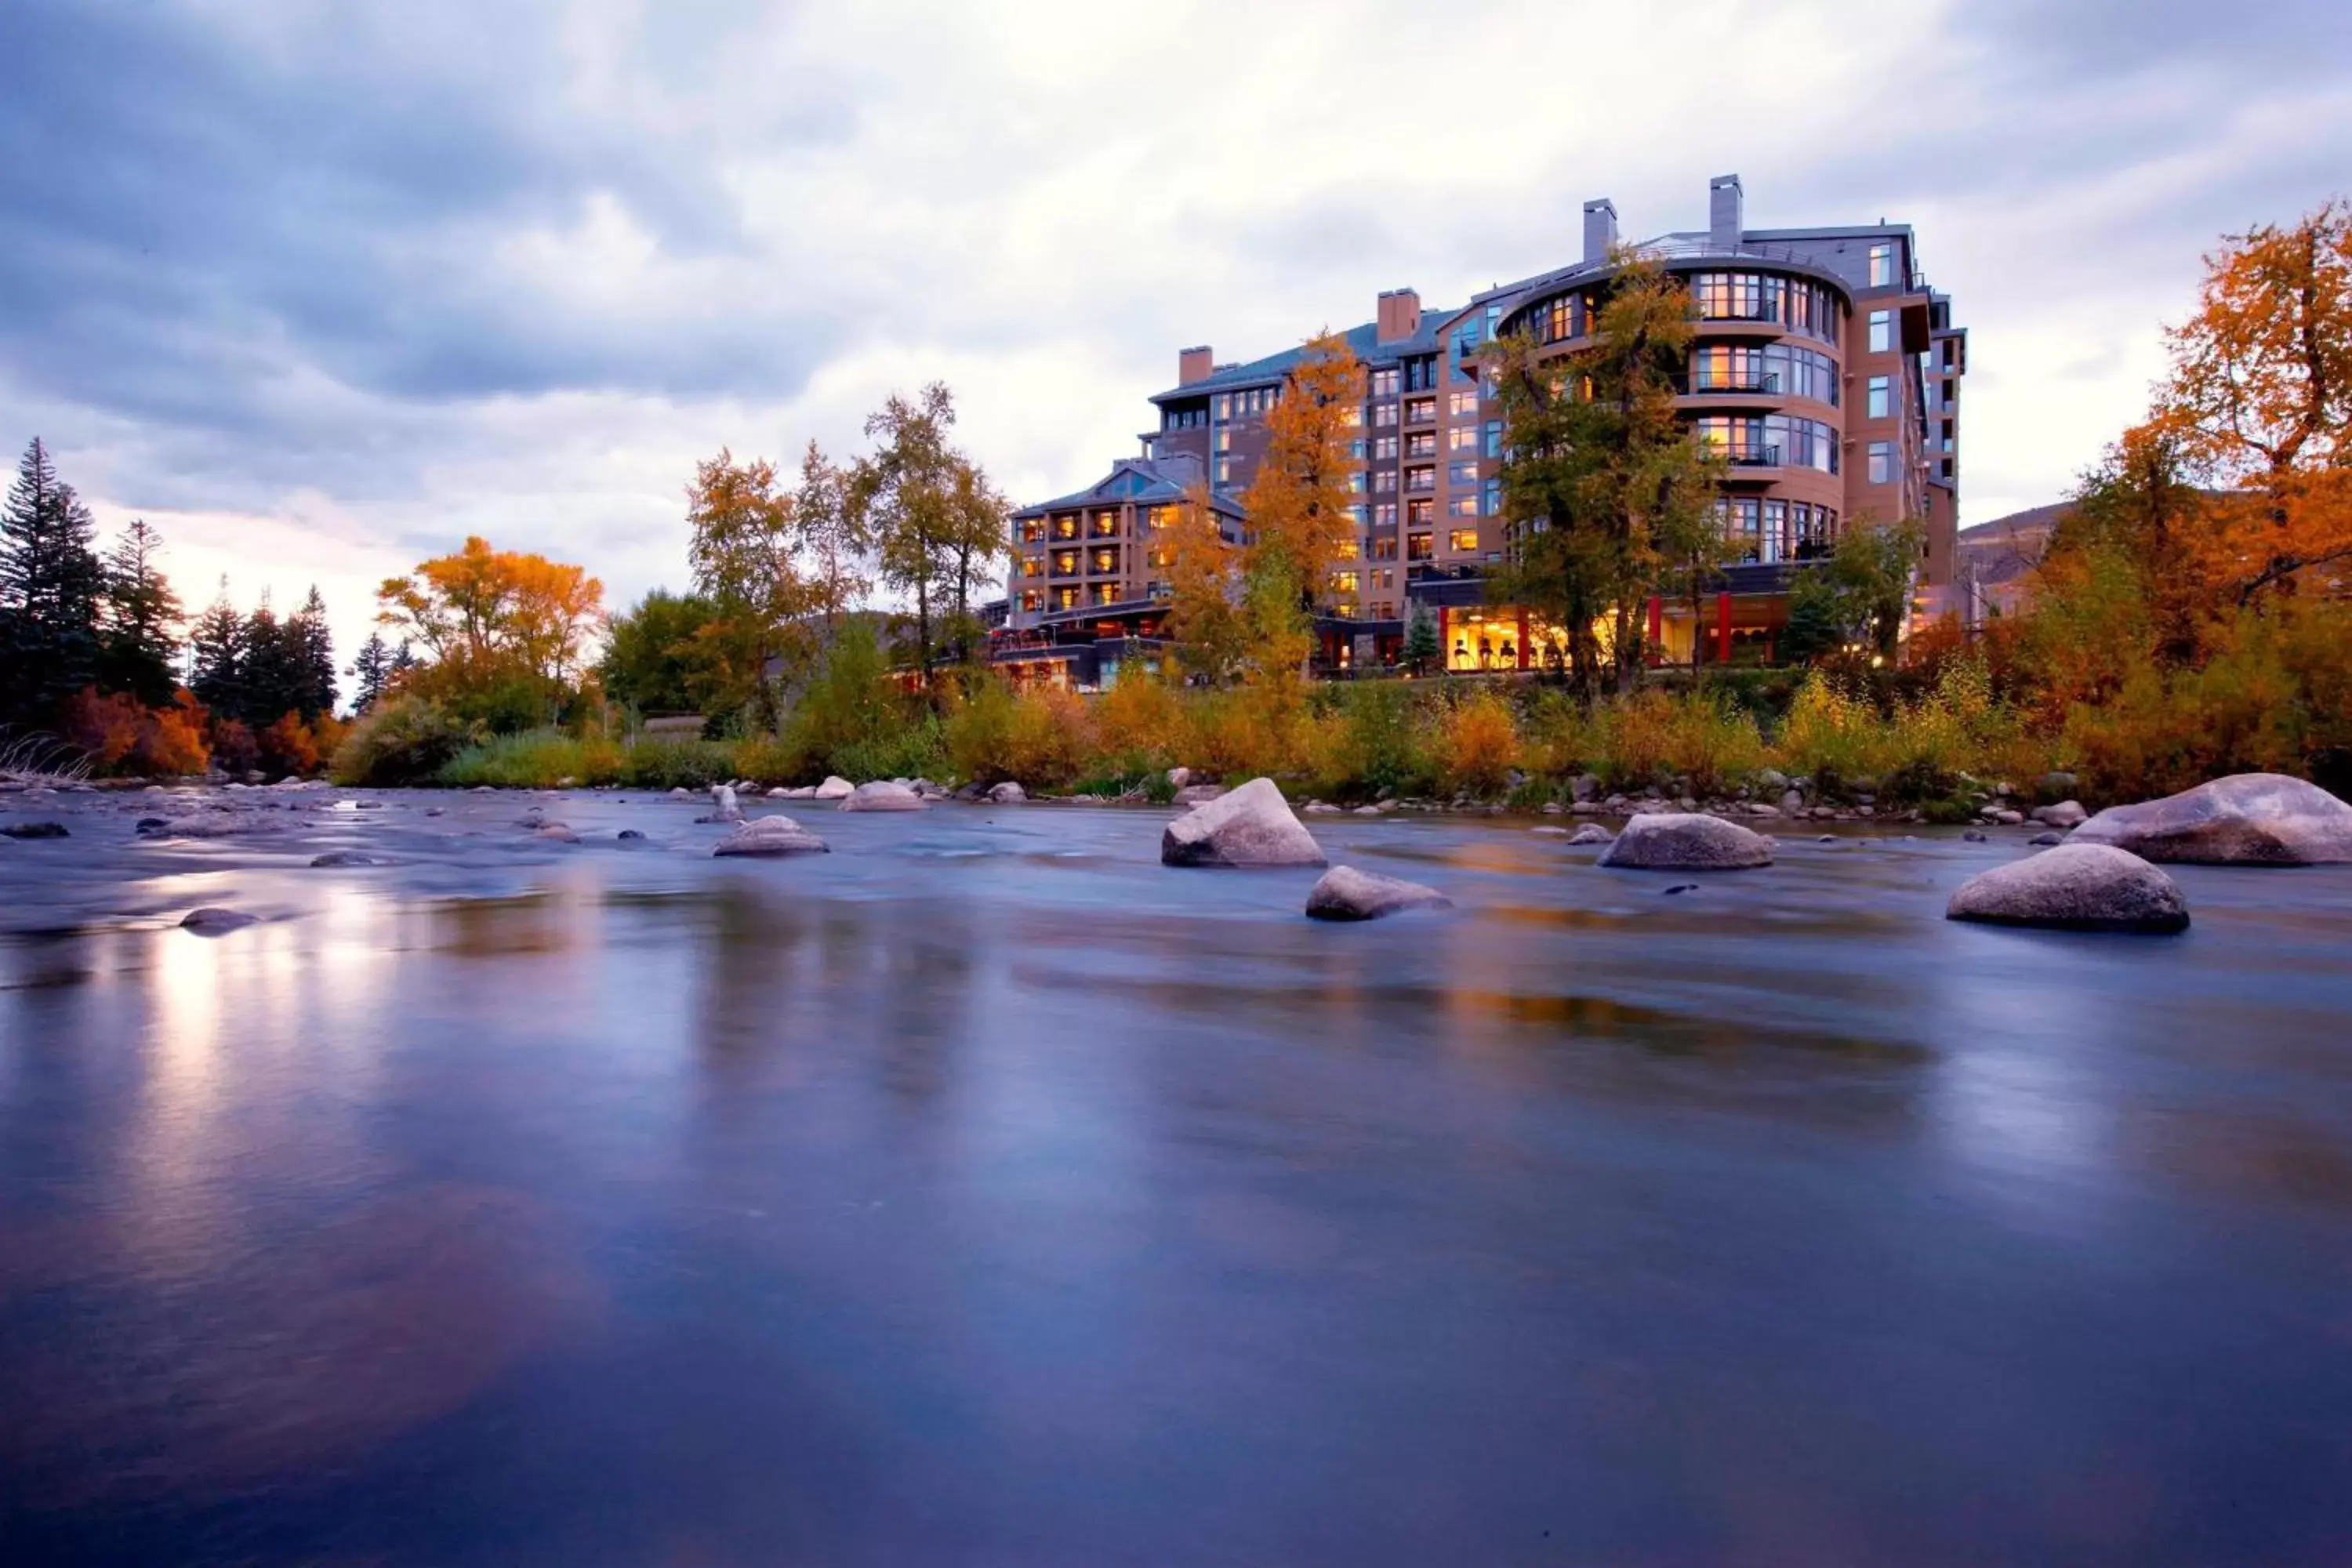 Property building in The Westin Riverfront Resort & Spa, Avon, Vail Valley